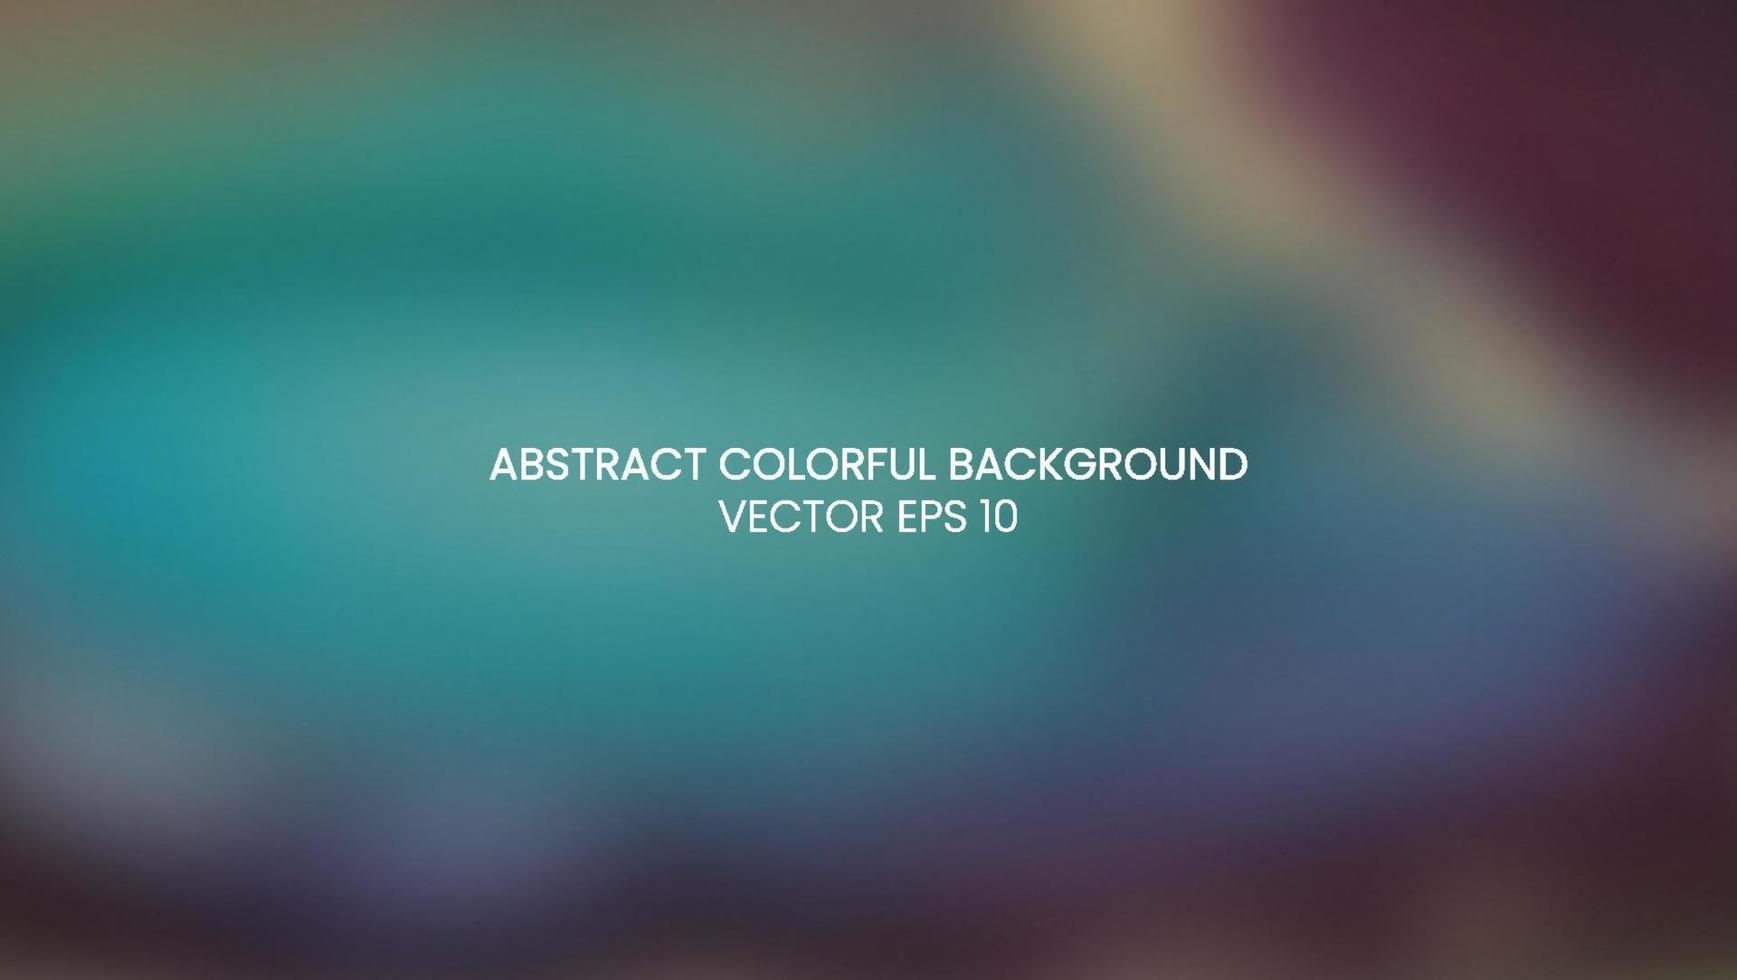 Abstract and Blurred Image Background vector